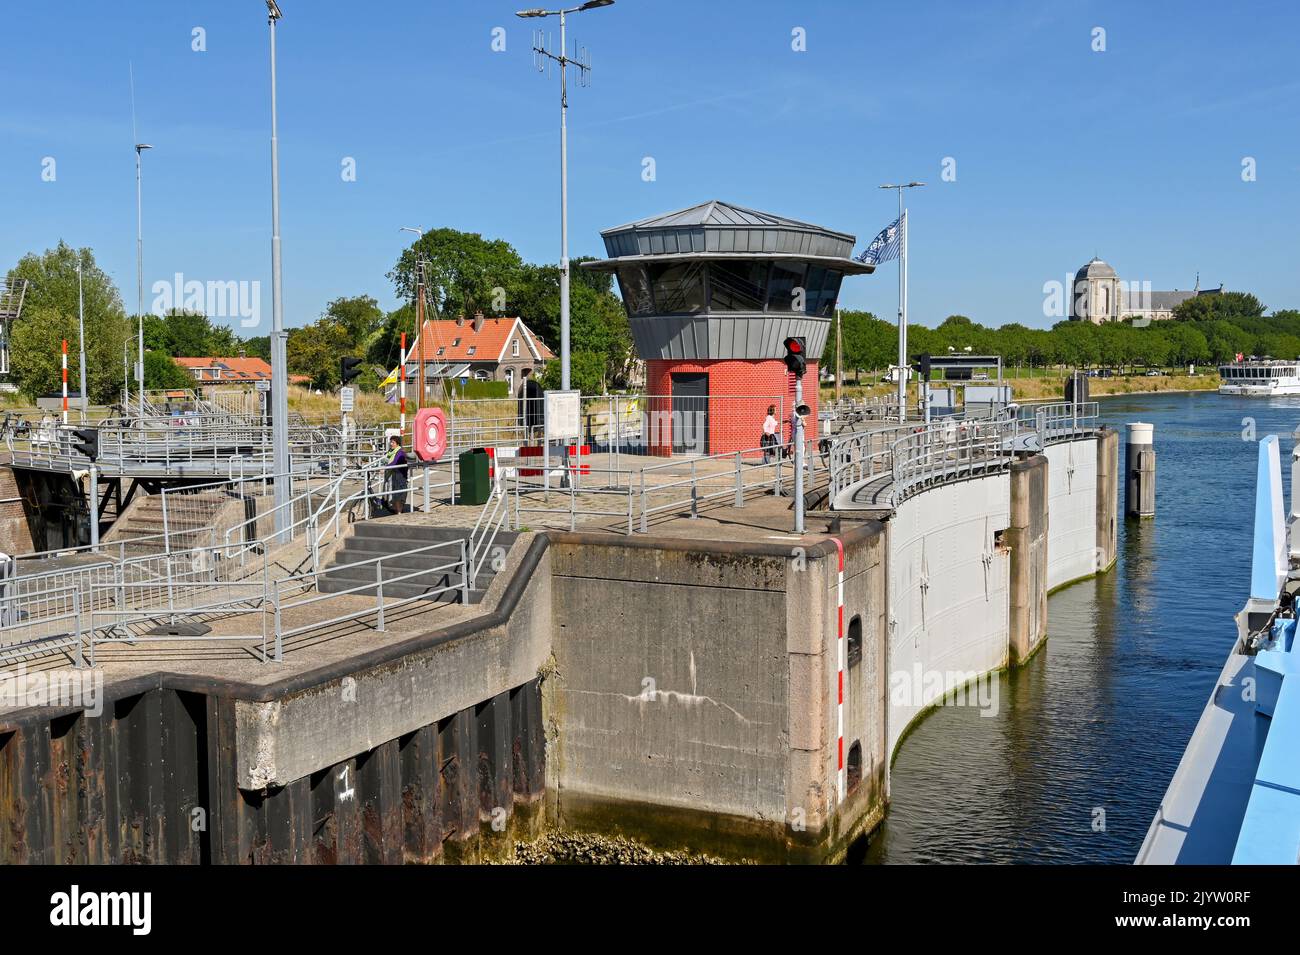 Veere, Netherlands - August 2022: River cruise ship entering the canal lock near the town with lock gate open Stock Photo